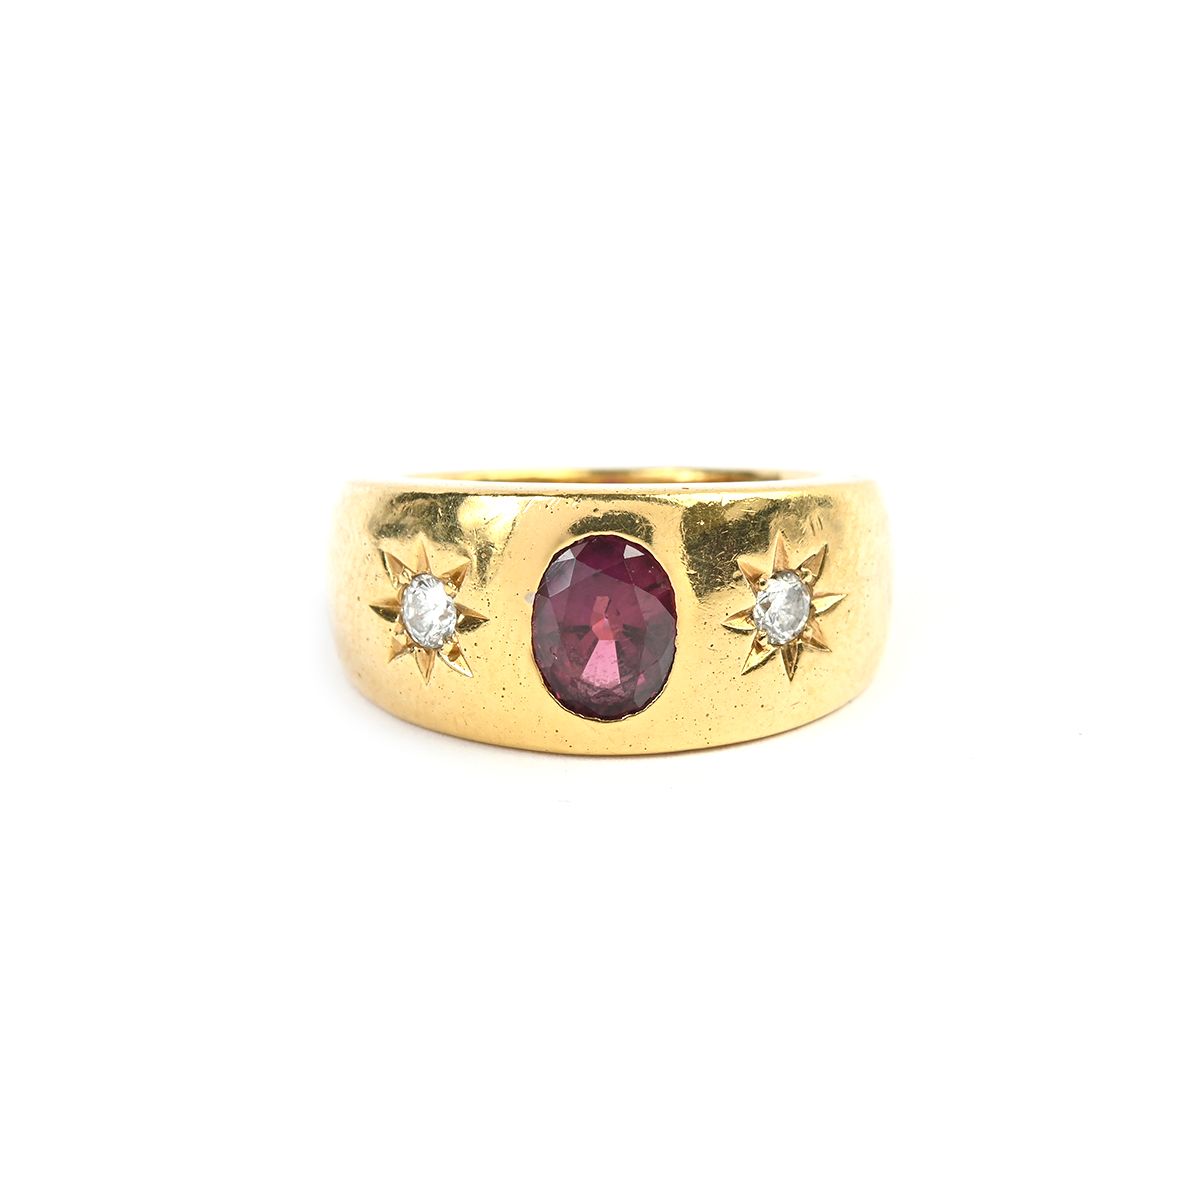 May Gallery Auction
Friday, May 17th | 10 a.m.
Garnet, Diamond, 18k Yellow Gold Ring.
Estimate: $800 / $1,200
#michaansauctions #auctions #michaans #galleryauction #jewelry #ring #goldring #diamondring #garnetring #diamondgoldring #garnetgoldring #garnetdiamondgoldring